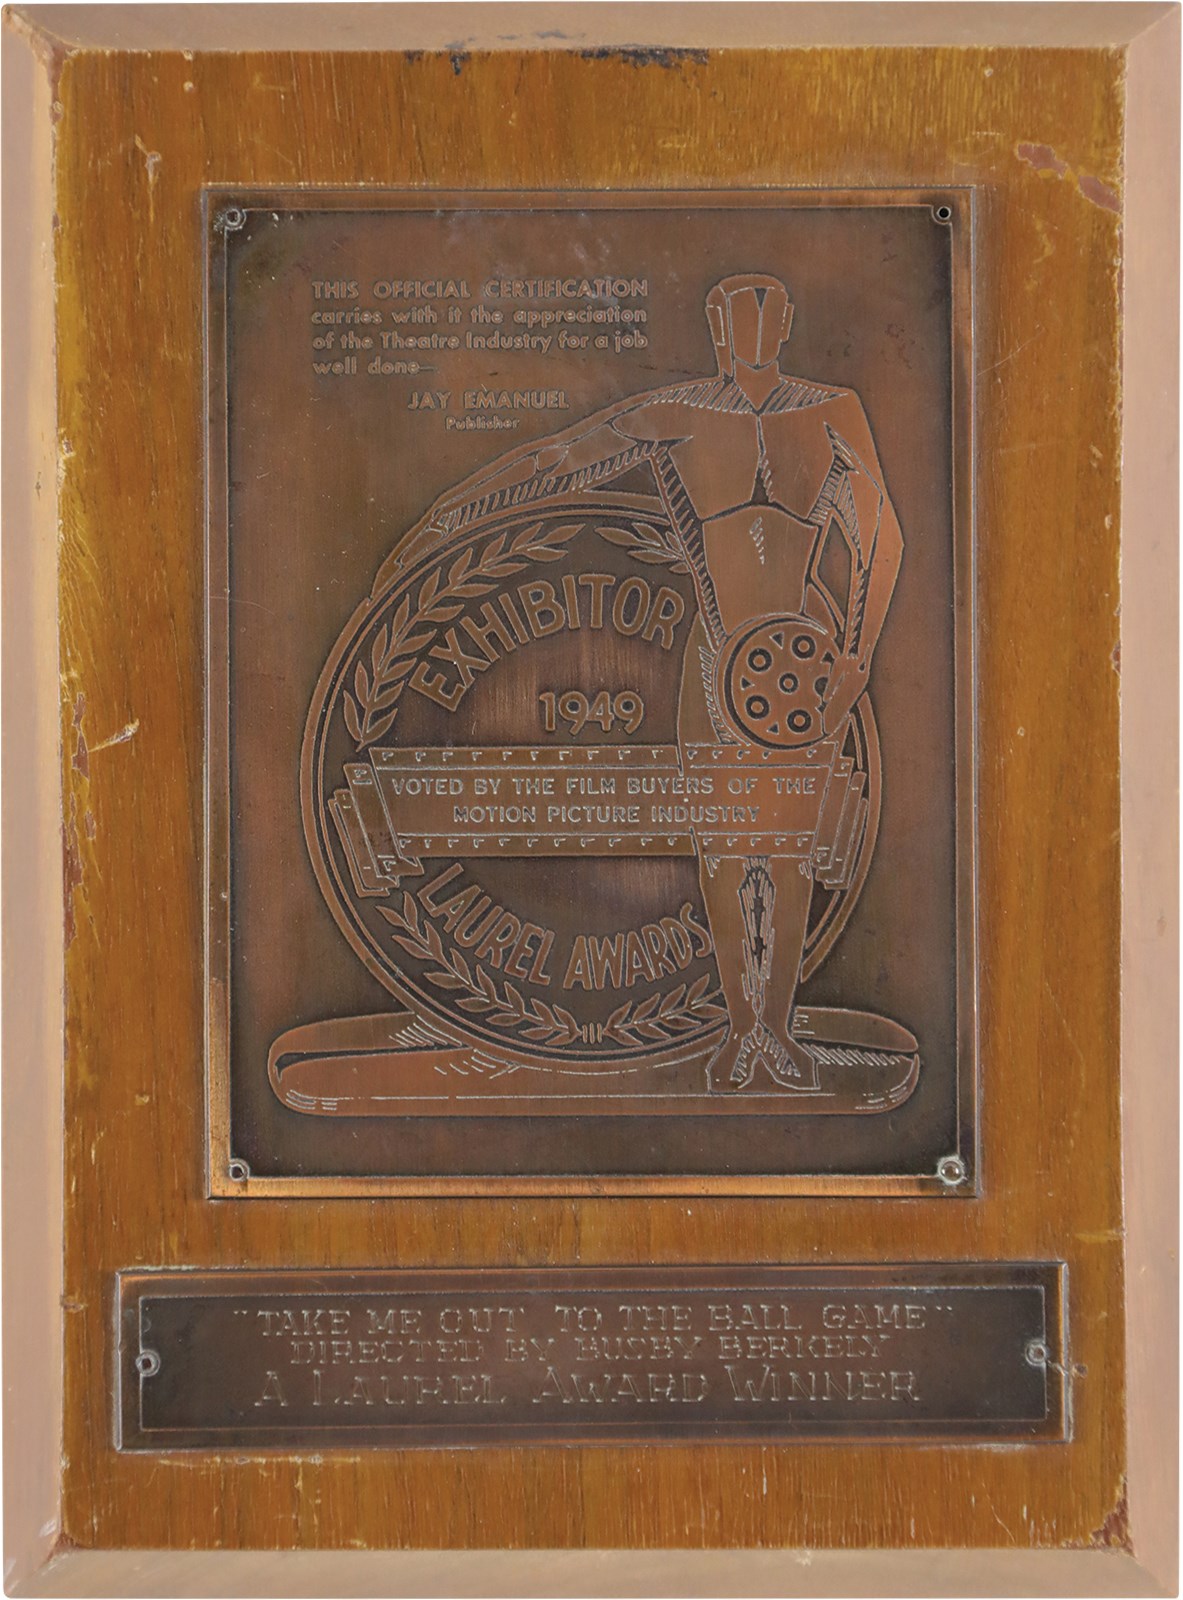 - 1949 Laurel Award Winner "Take Me Out to the Ball Game" Plaque